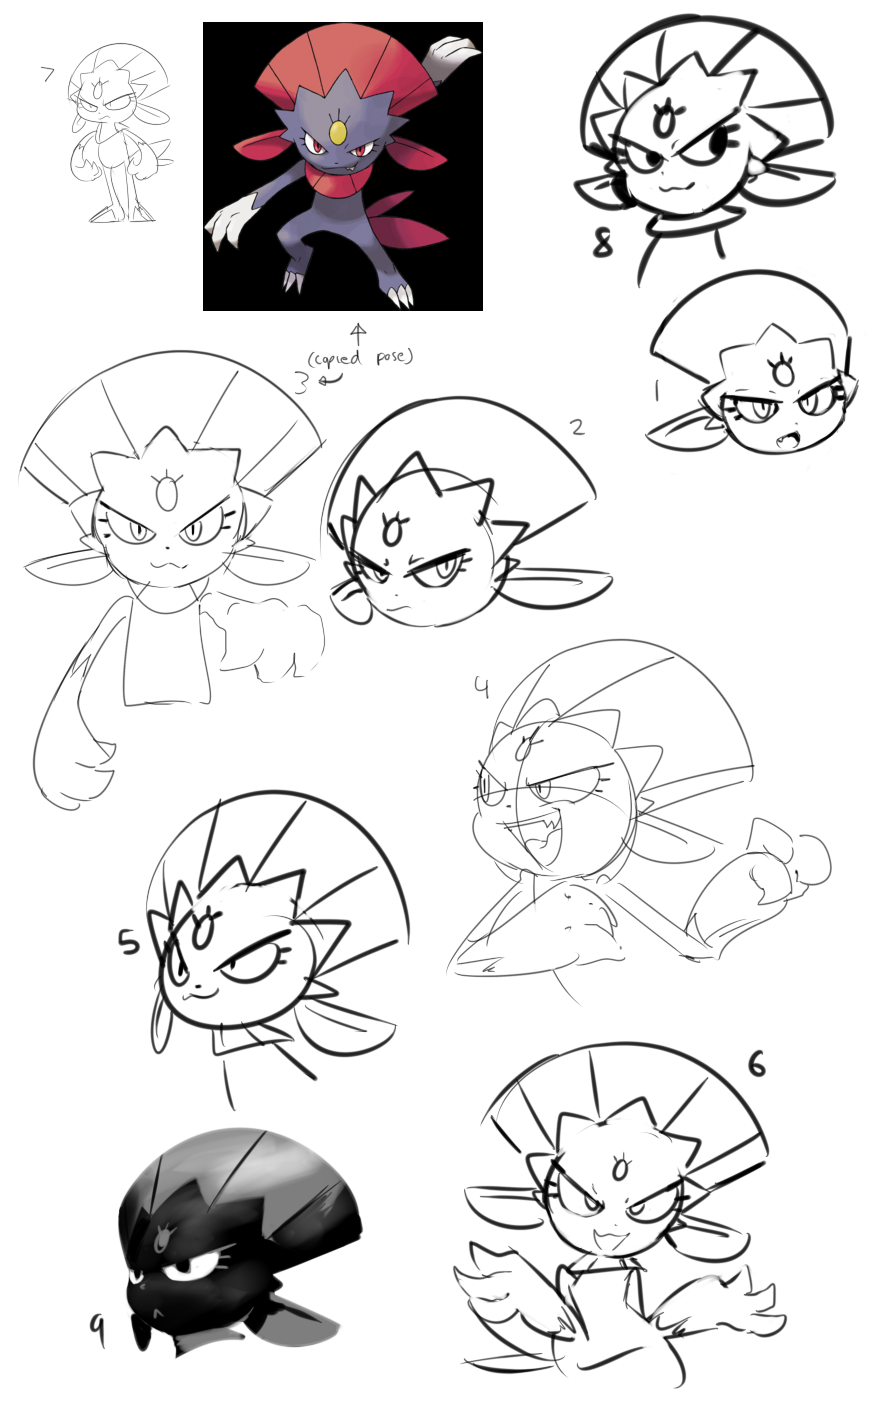 March 19th Weavile Practice